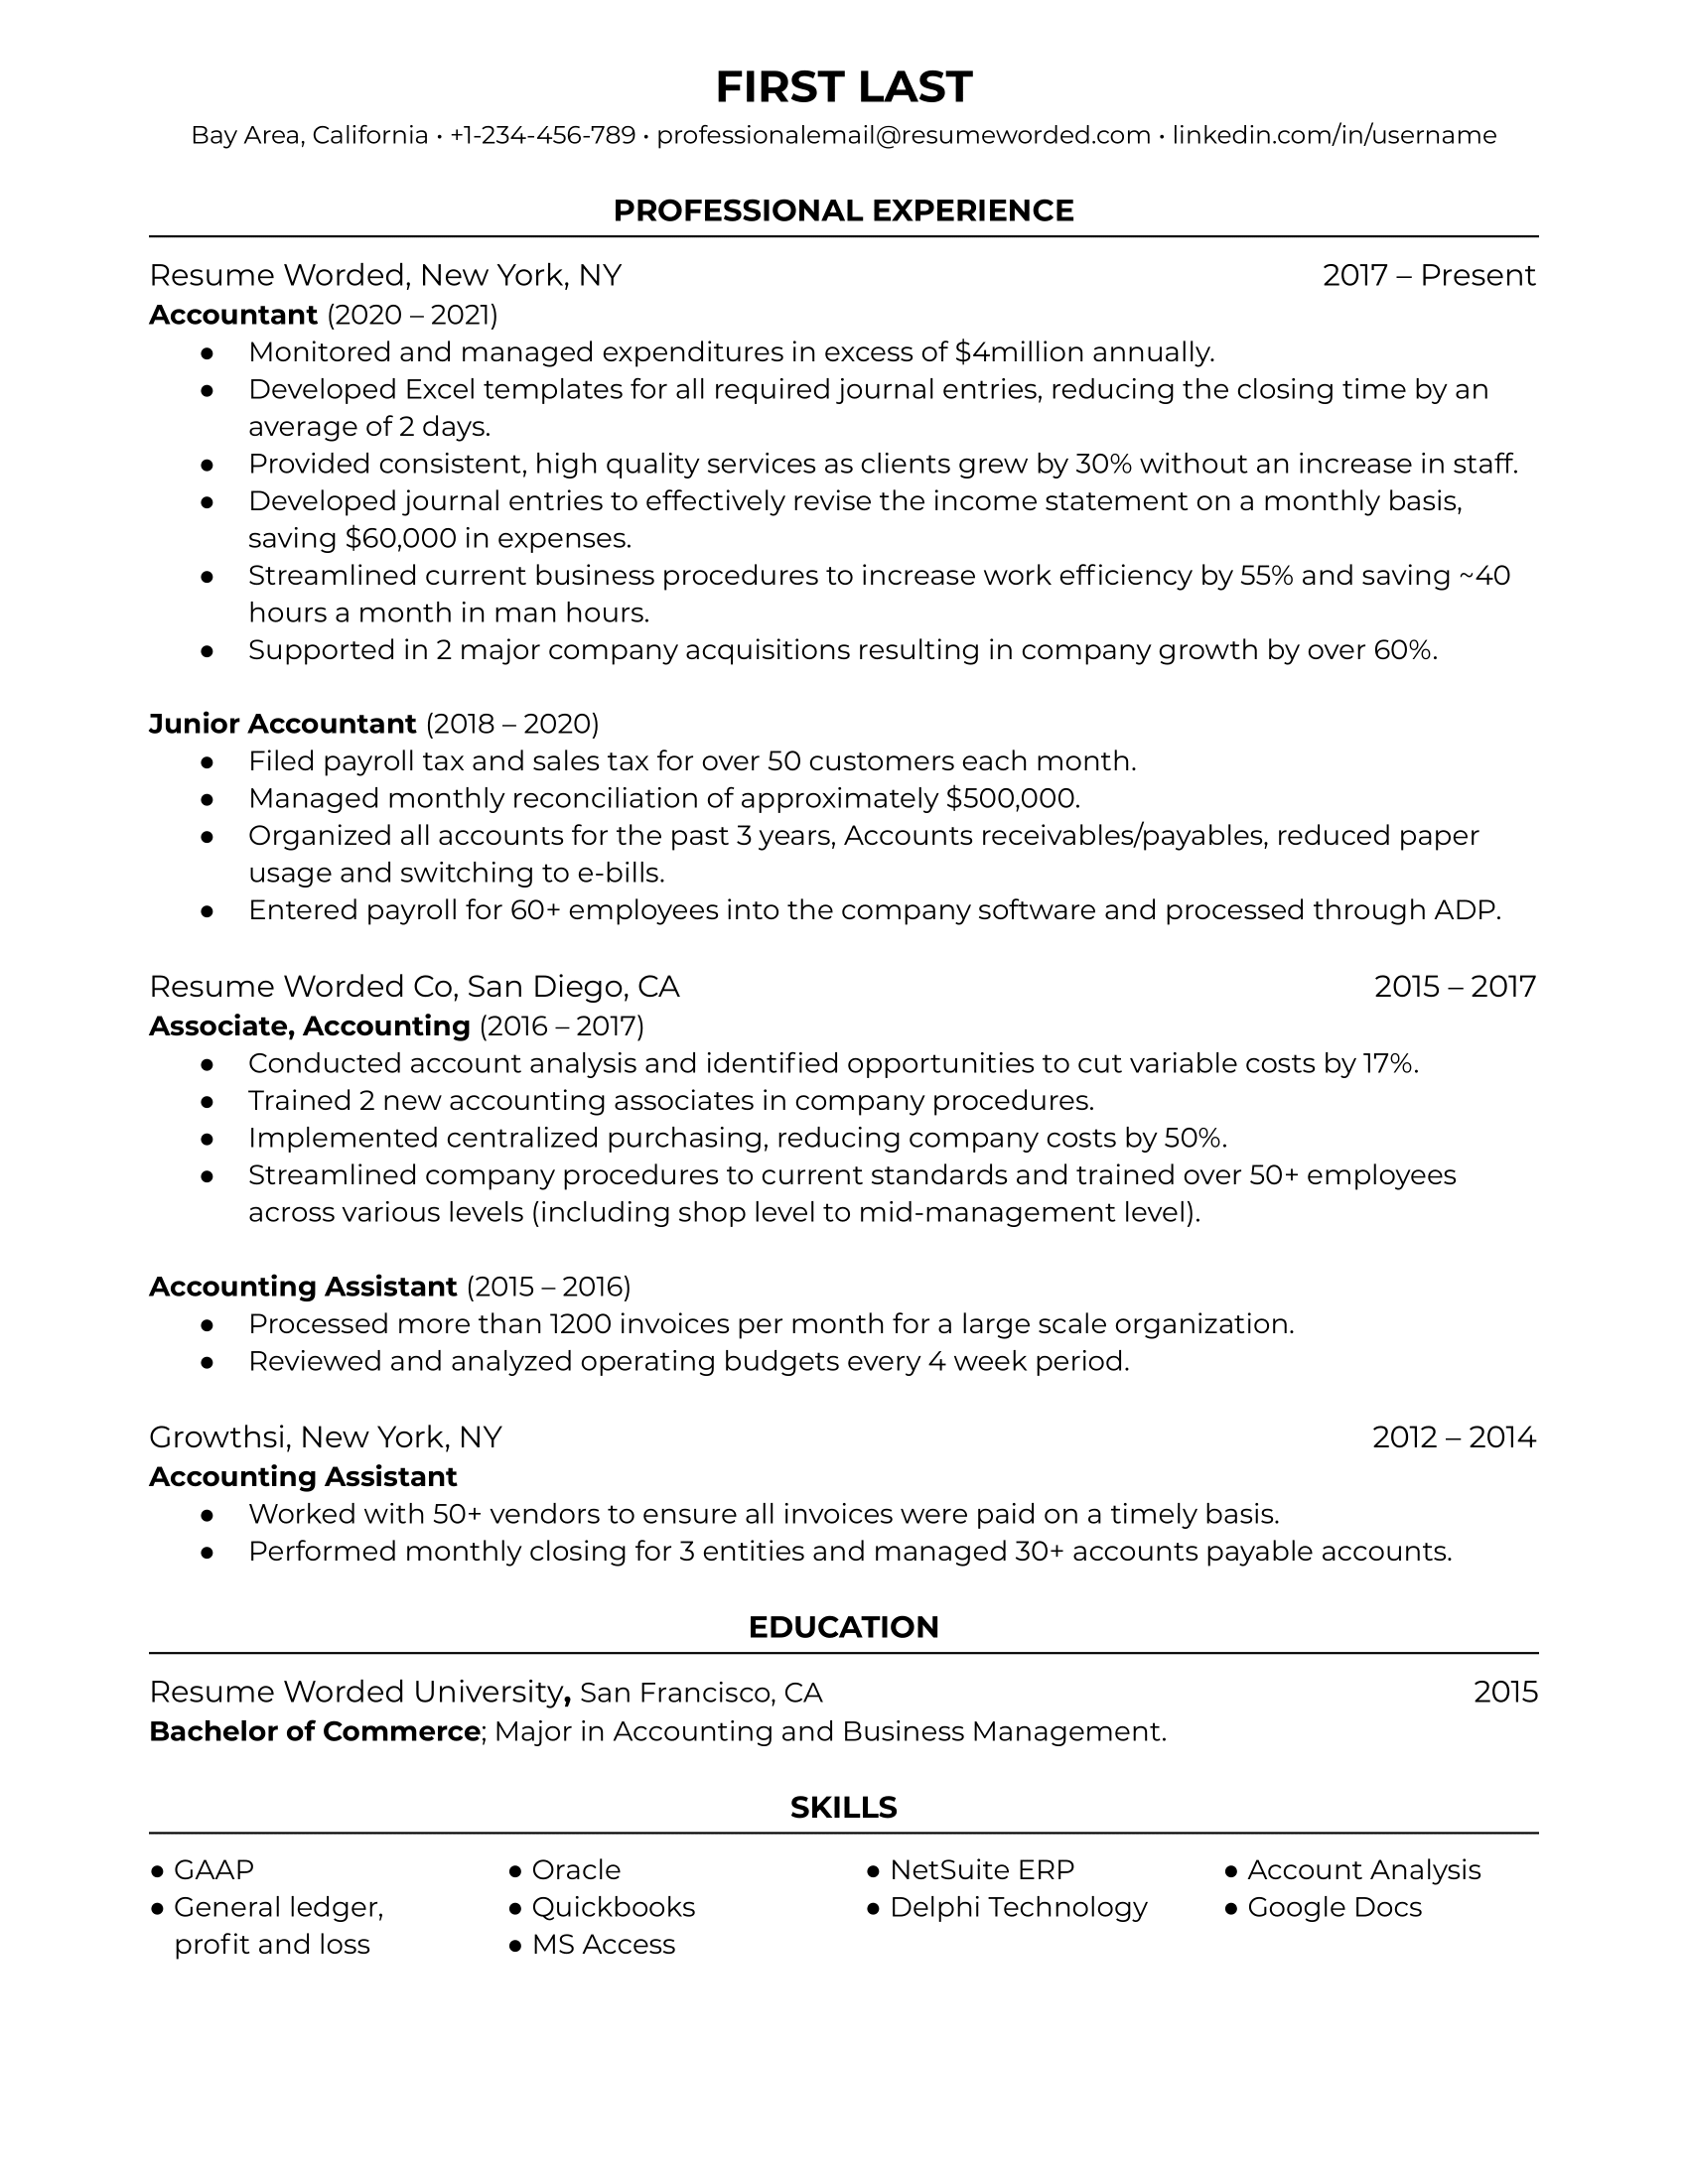 An accountant resume template using metrics to highlight achievements.